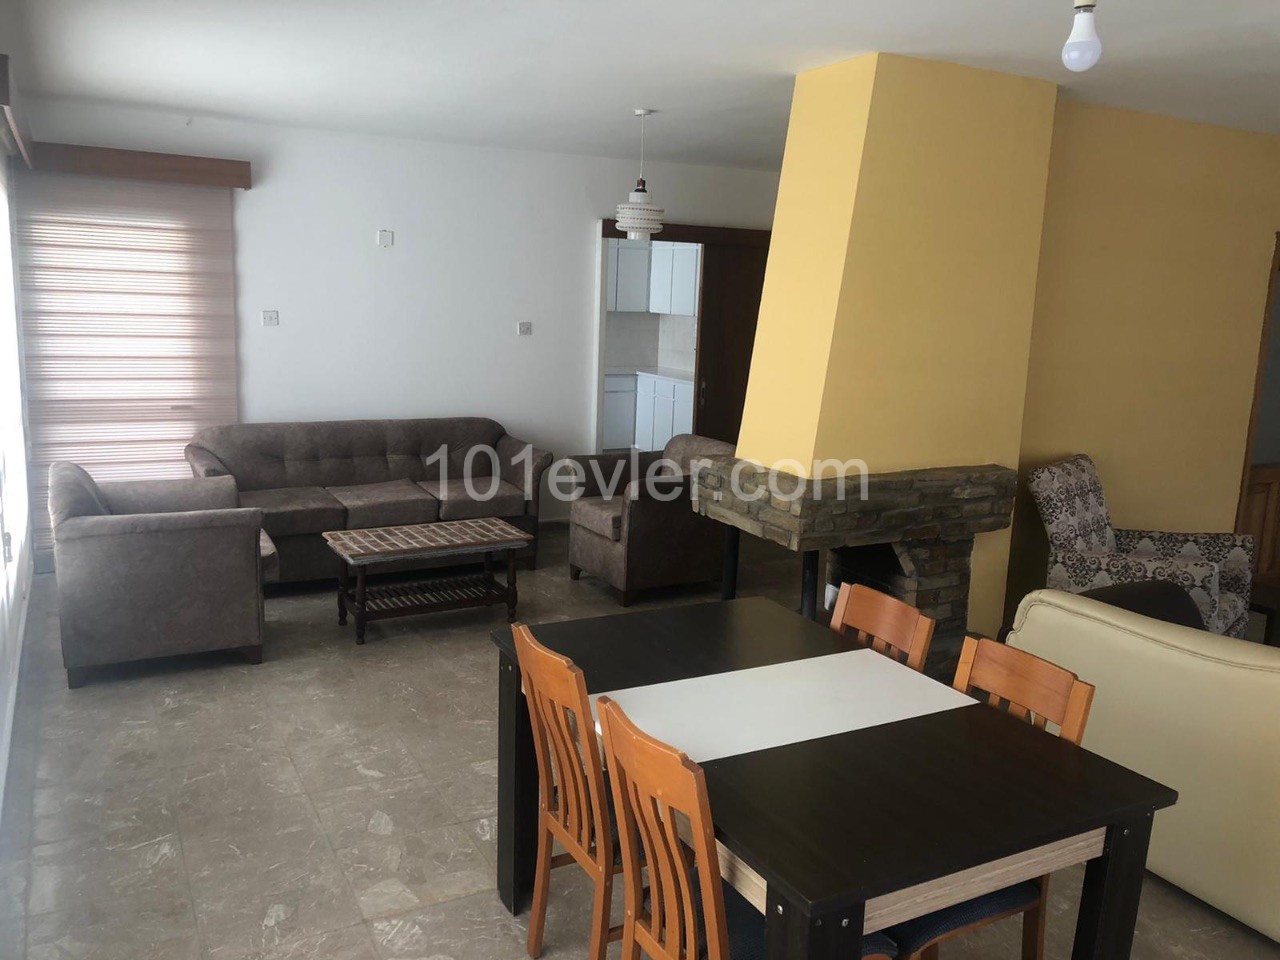 180 m² 3+1 flat for sale with fireplace on the main street in Kyrenia ** 